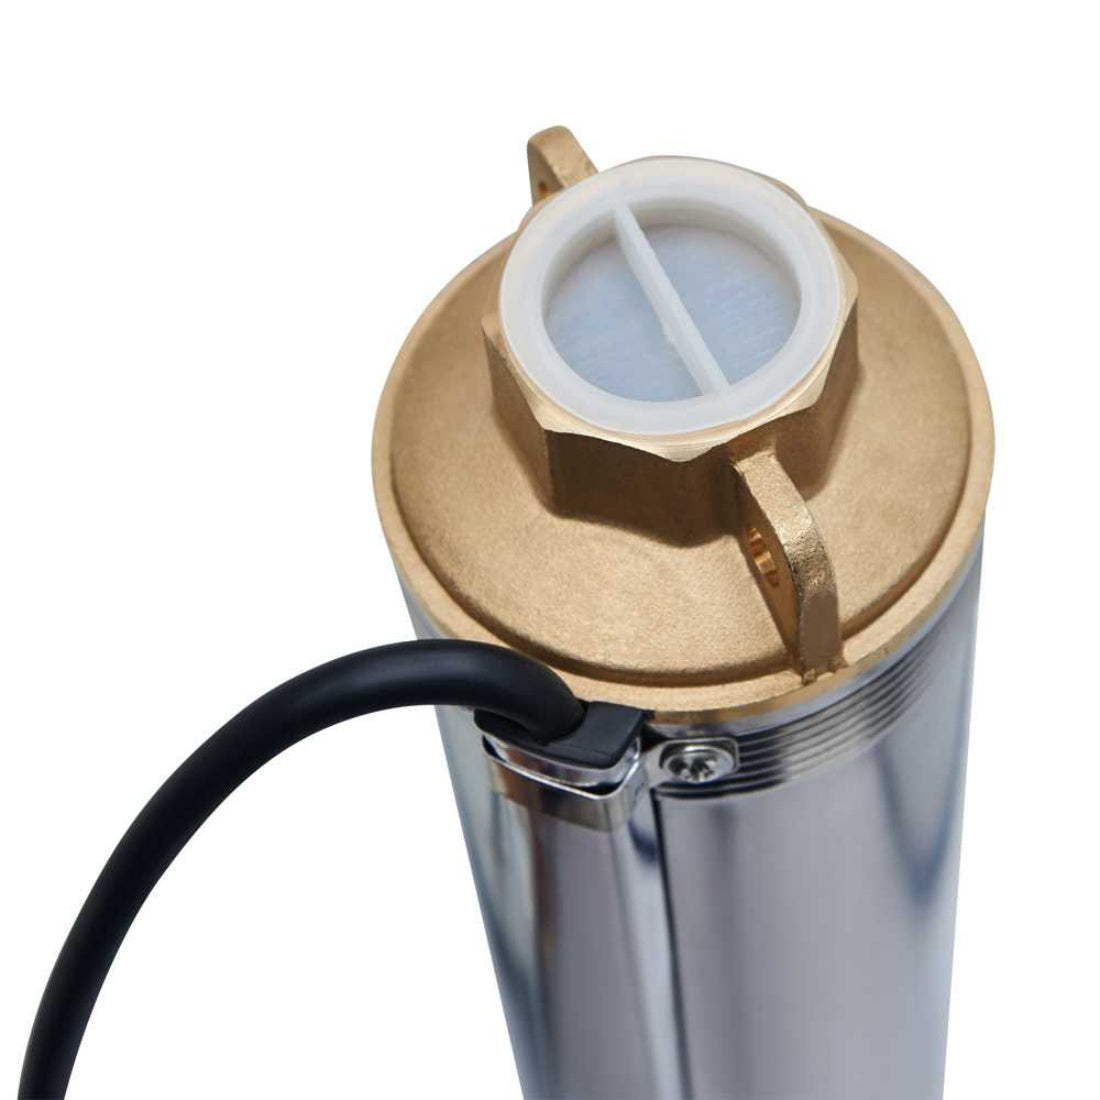 NEW 2.0 HP SUBMERSIBLE BORE WATER PUMP Deep Well Irrigation Stainless Steel 240V